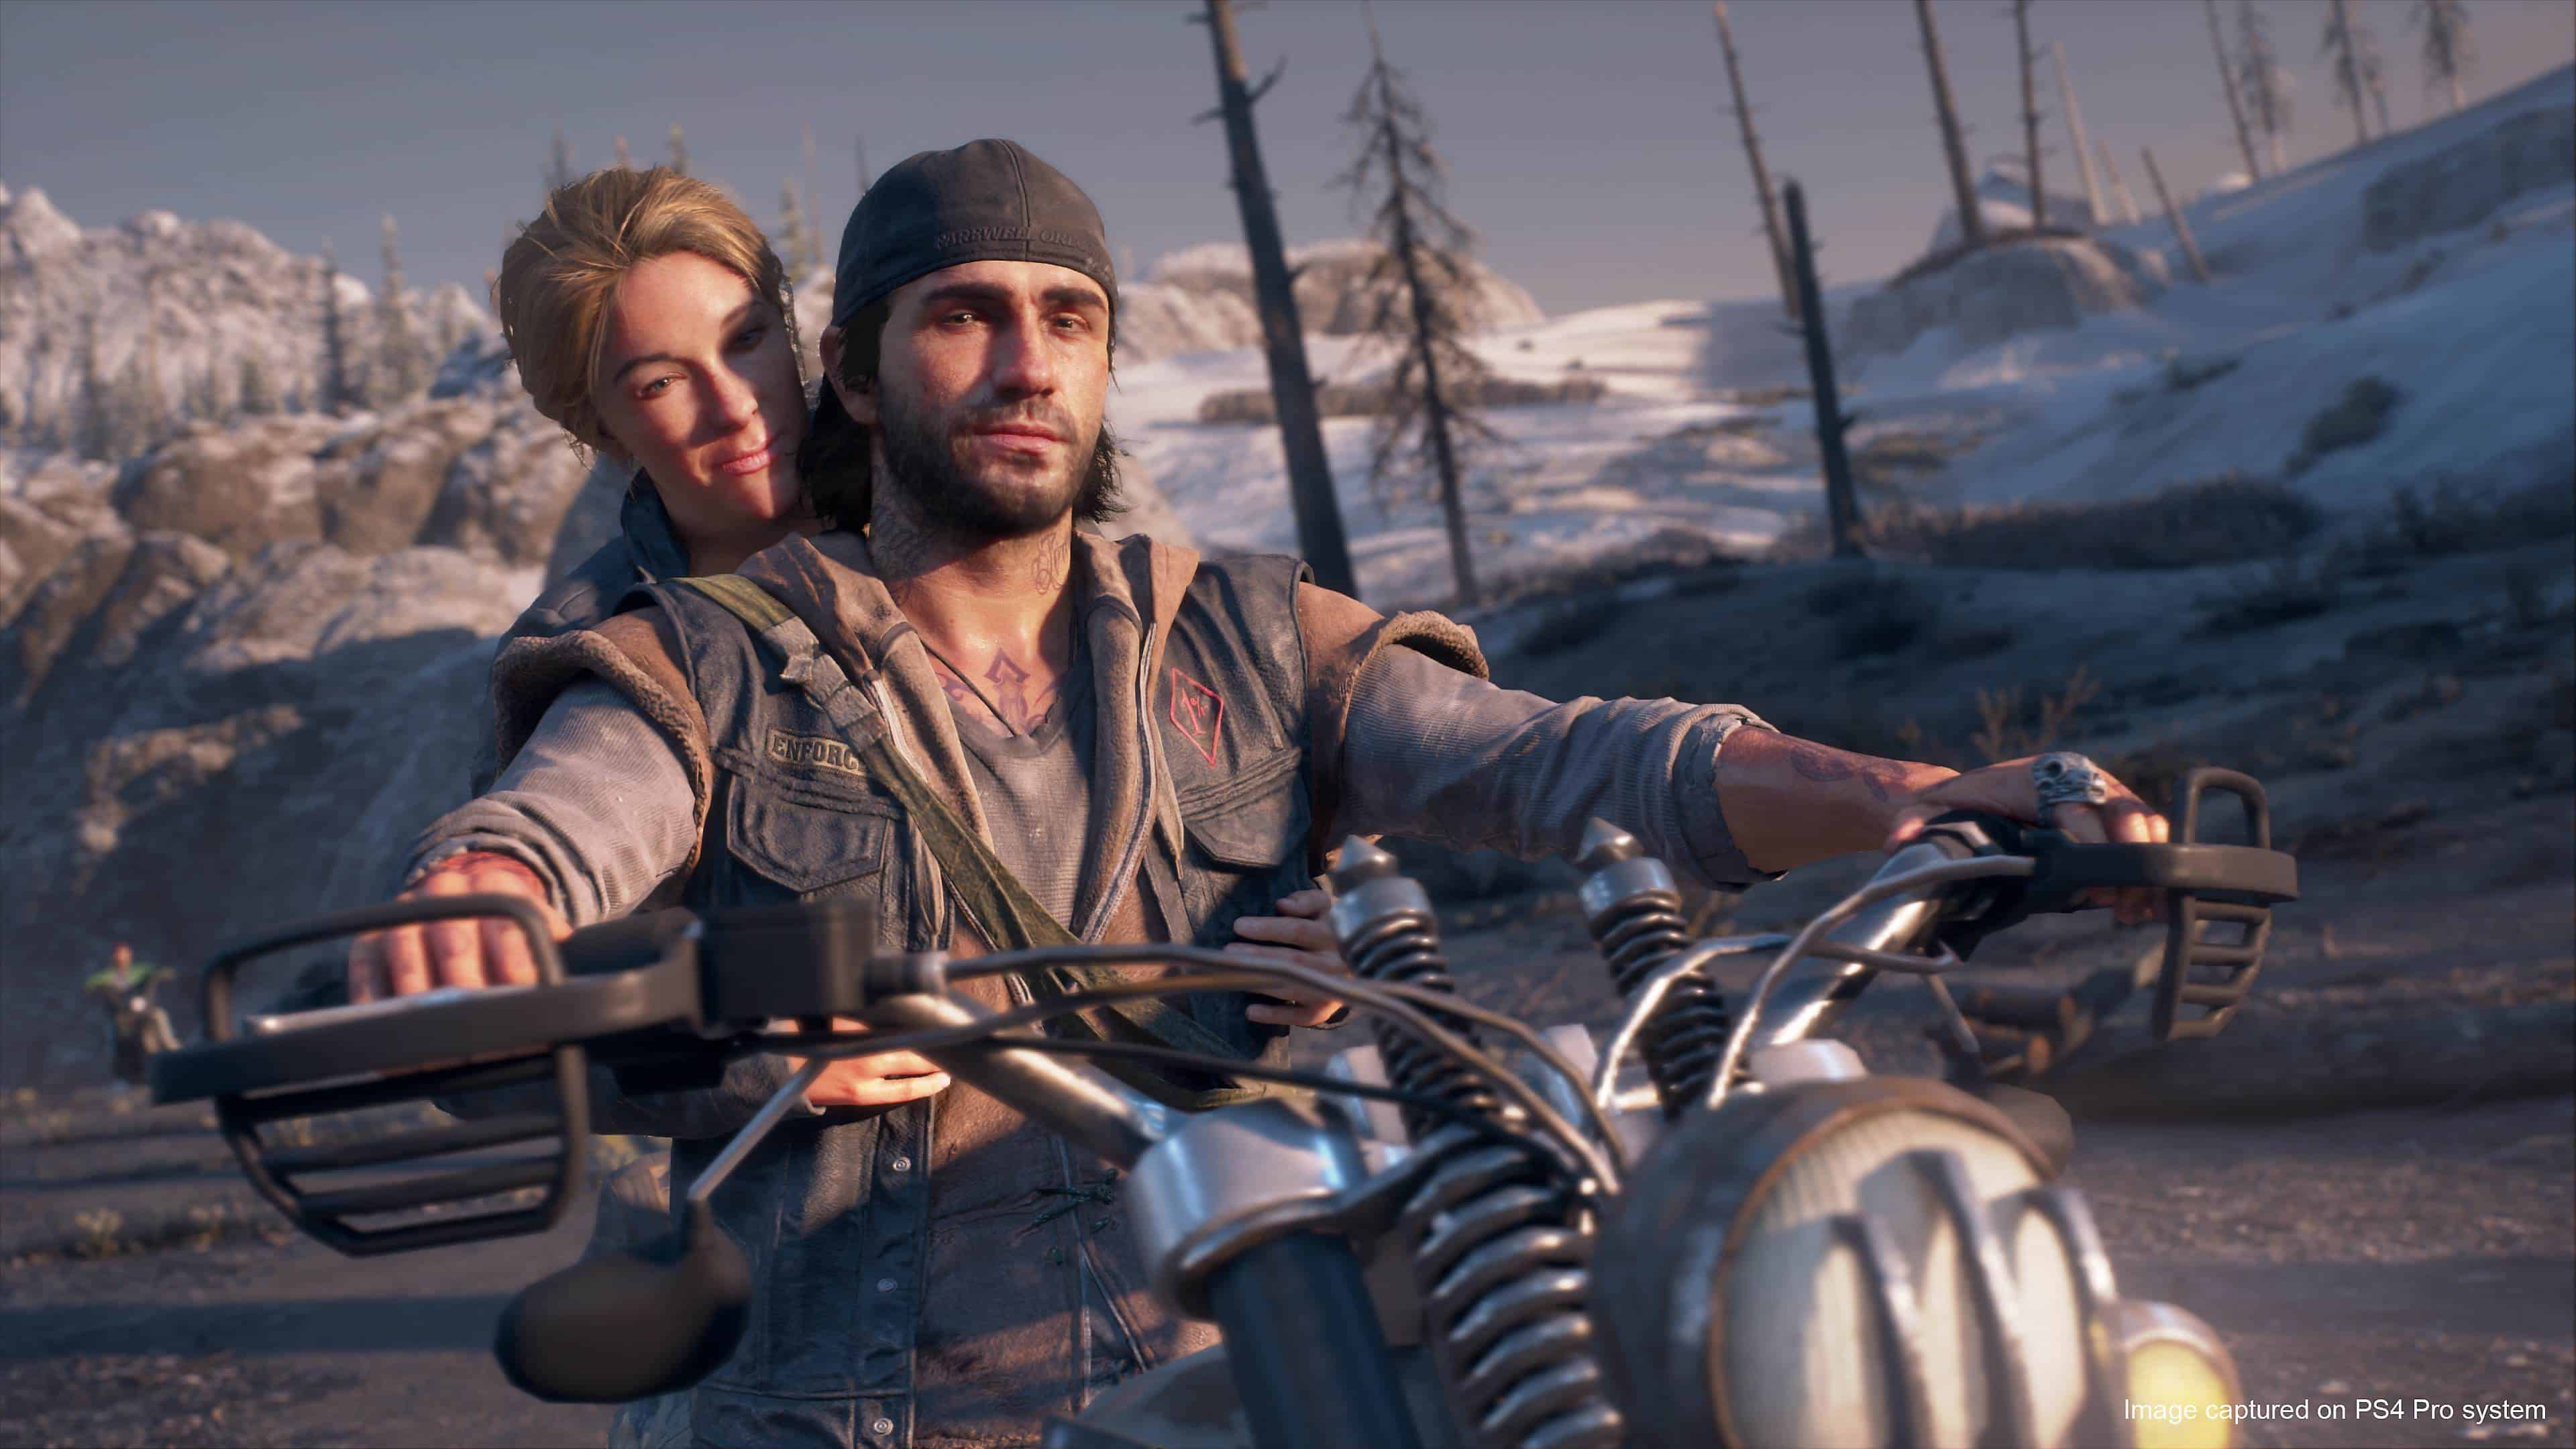 Days Gone Director, Analyst Disagree Over Why Big Games Can Flop - GameSpot